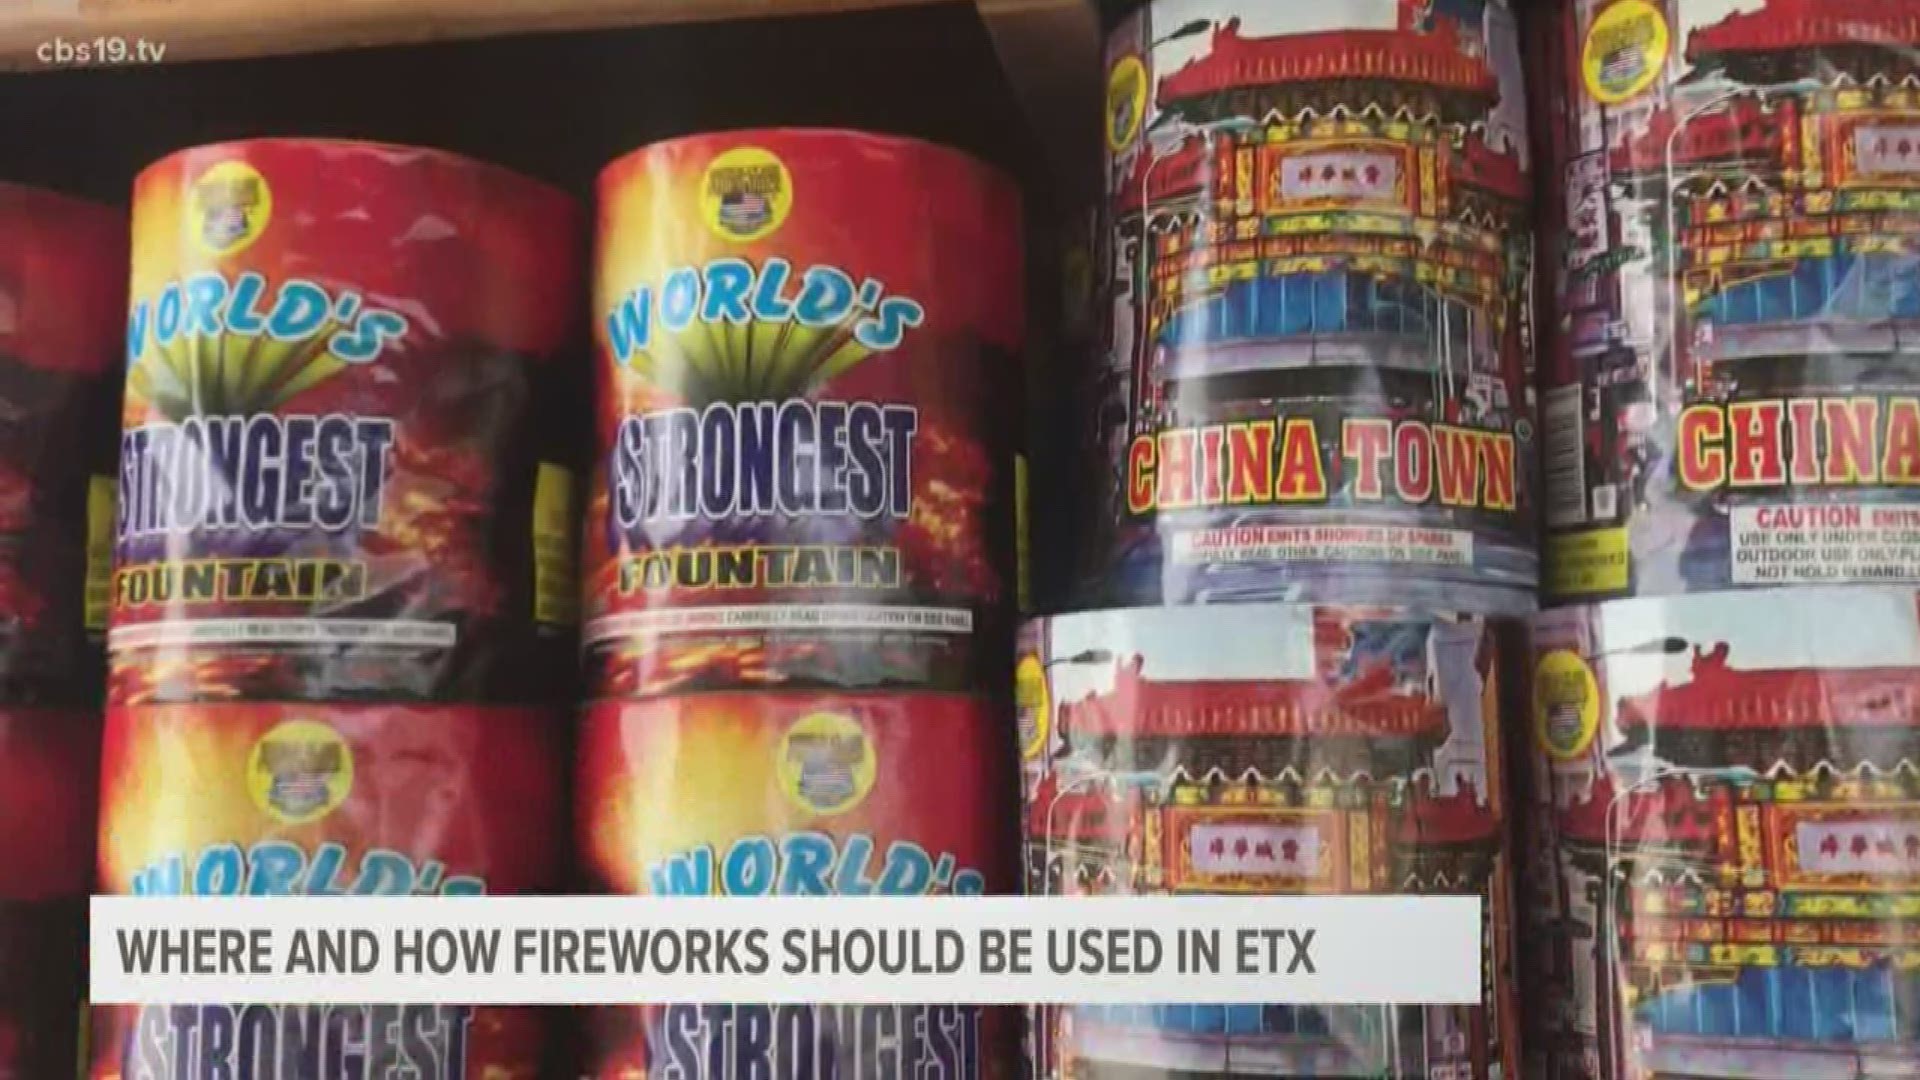 Before kicking off 2020 with a boom, here's what you need to know about fireworks in East Texas.